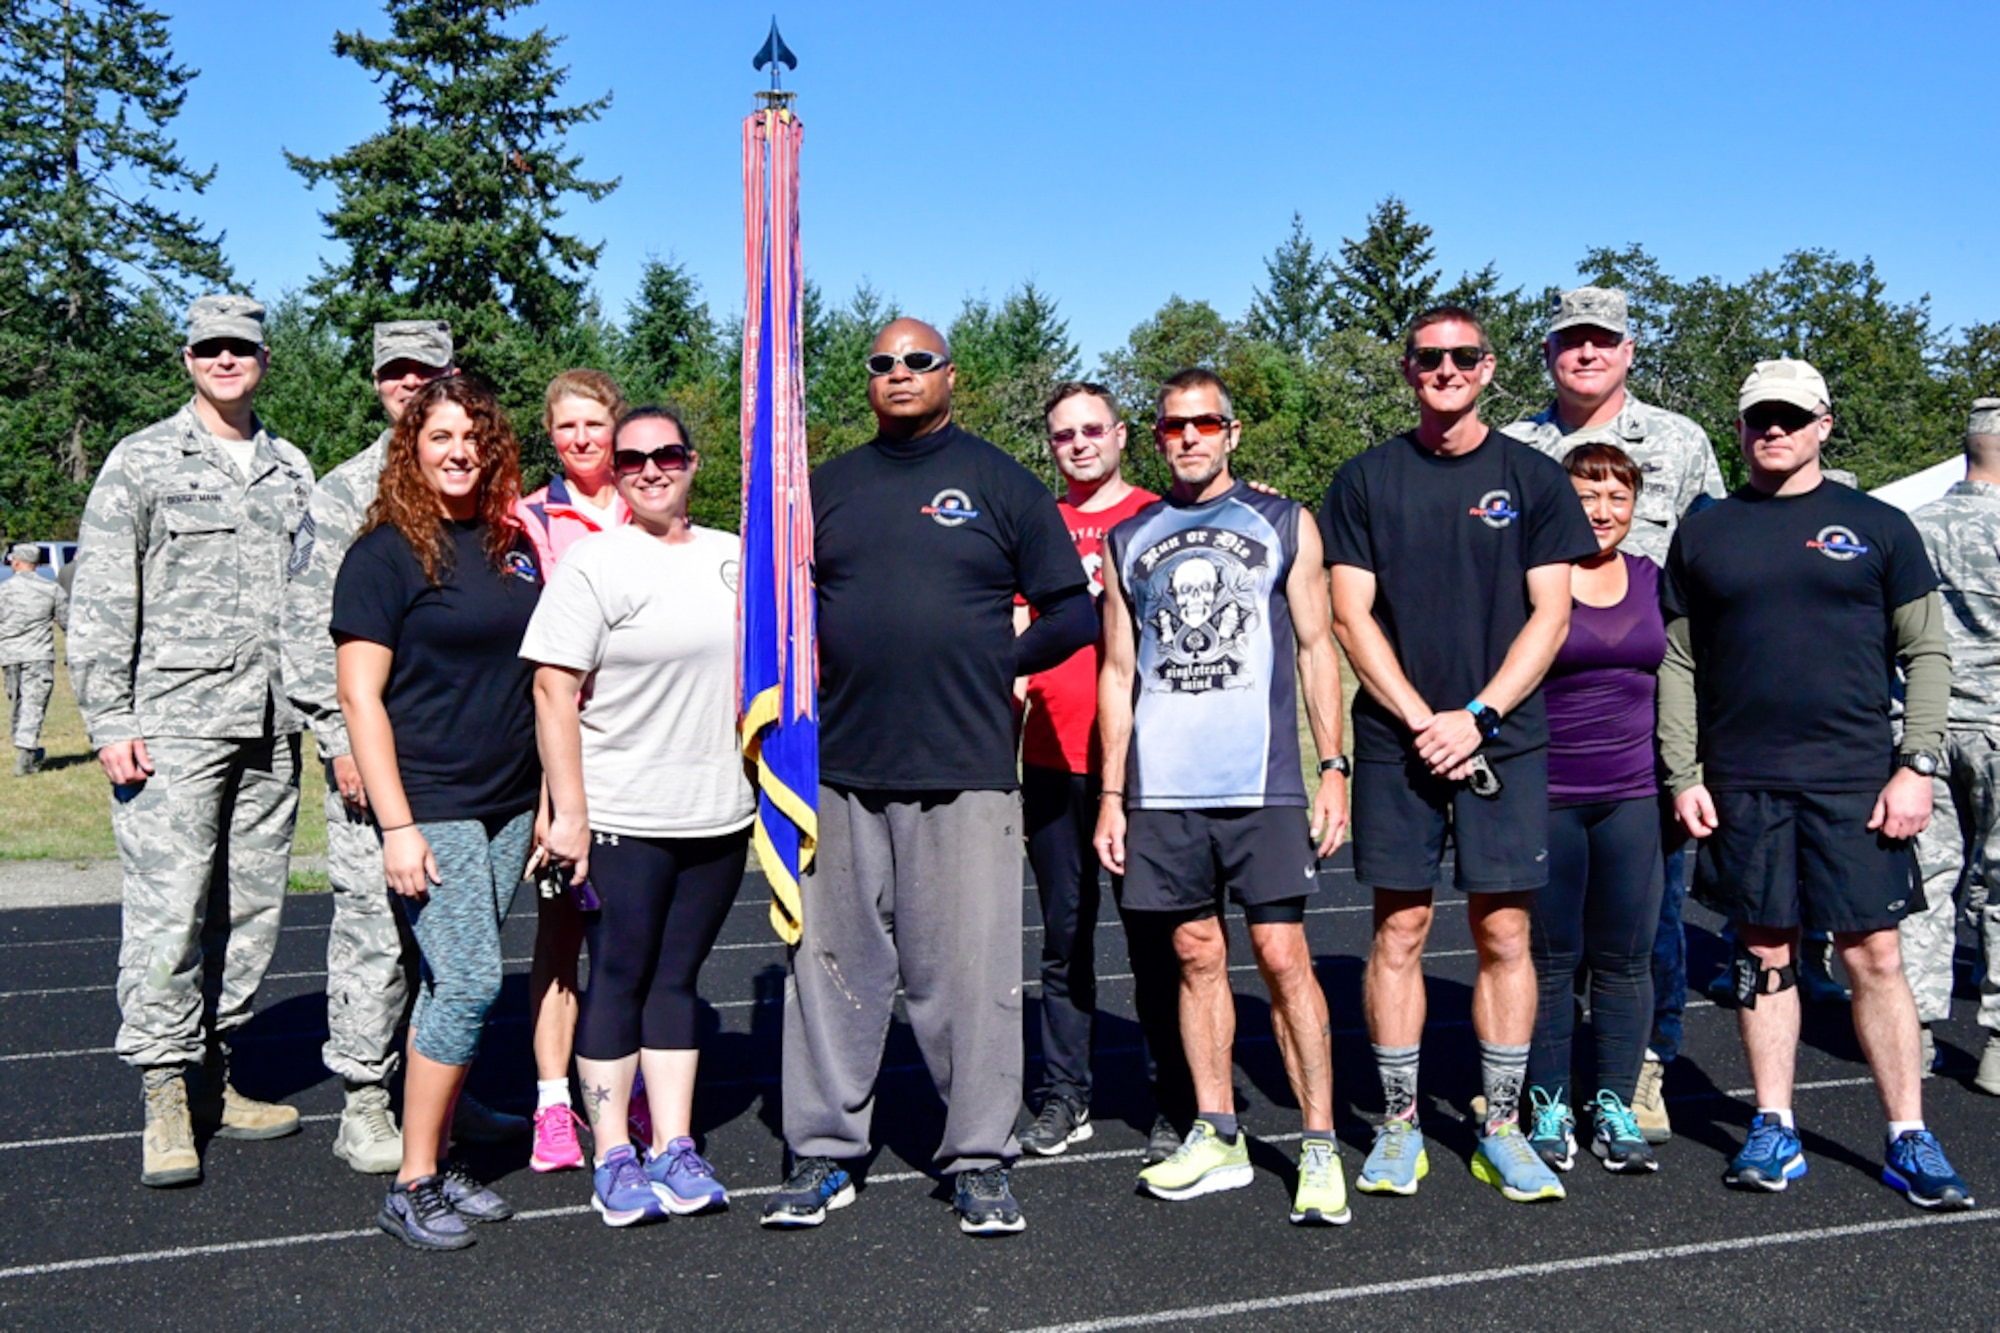 Members of the Western Air Defense Sector pose of a team photo after completing the 24-Hour POW/MIA Remembrance Run at the McChord Field track Sept. 19, 2018.  The WADS team completed 389 miles and place third in the overall team standings.  1st Lt. Kroby Keller place first in the individual standings with 100 miles and Bruce Robie placed second in the individual standings with 74 miles. (U.S. Air National Guard photo by Maj. Kimberly Burke)